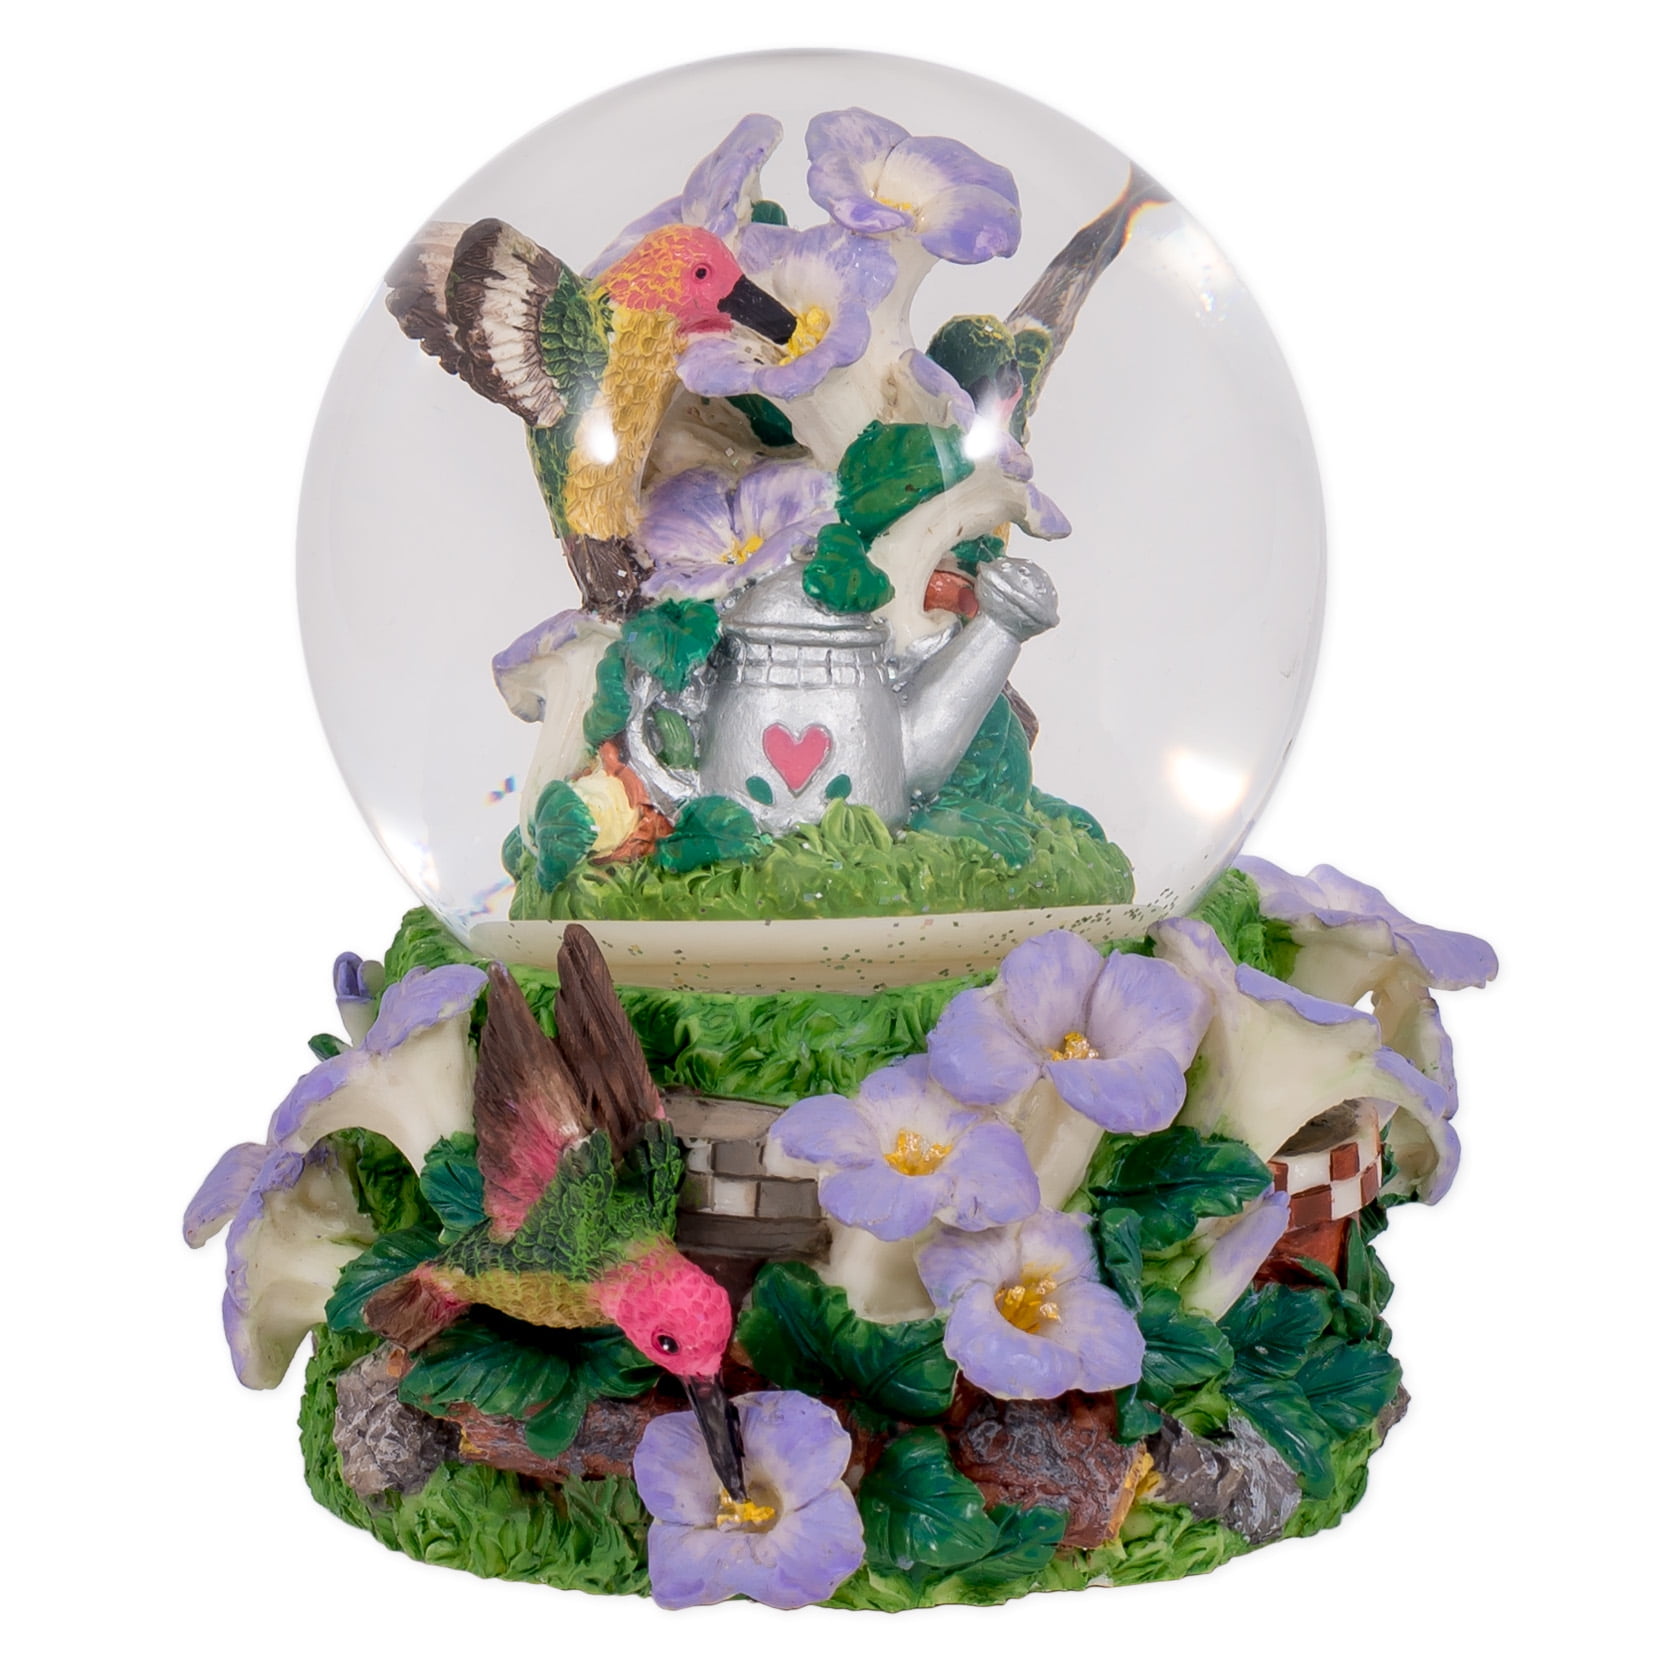 Castle Unicorn with Green Dragon 100mm Resin Glitter Water Globe Plays Tune Our Father Cadona International Inc